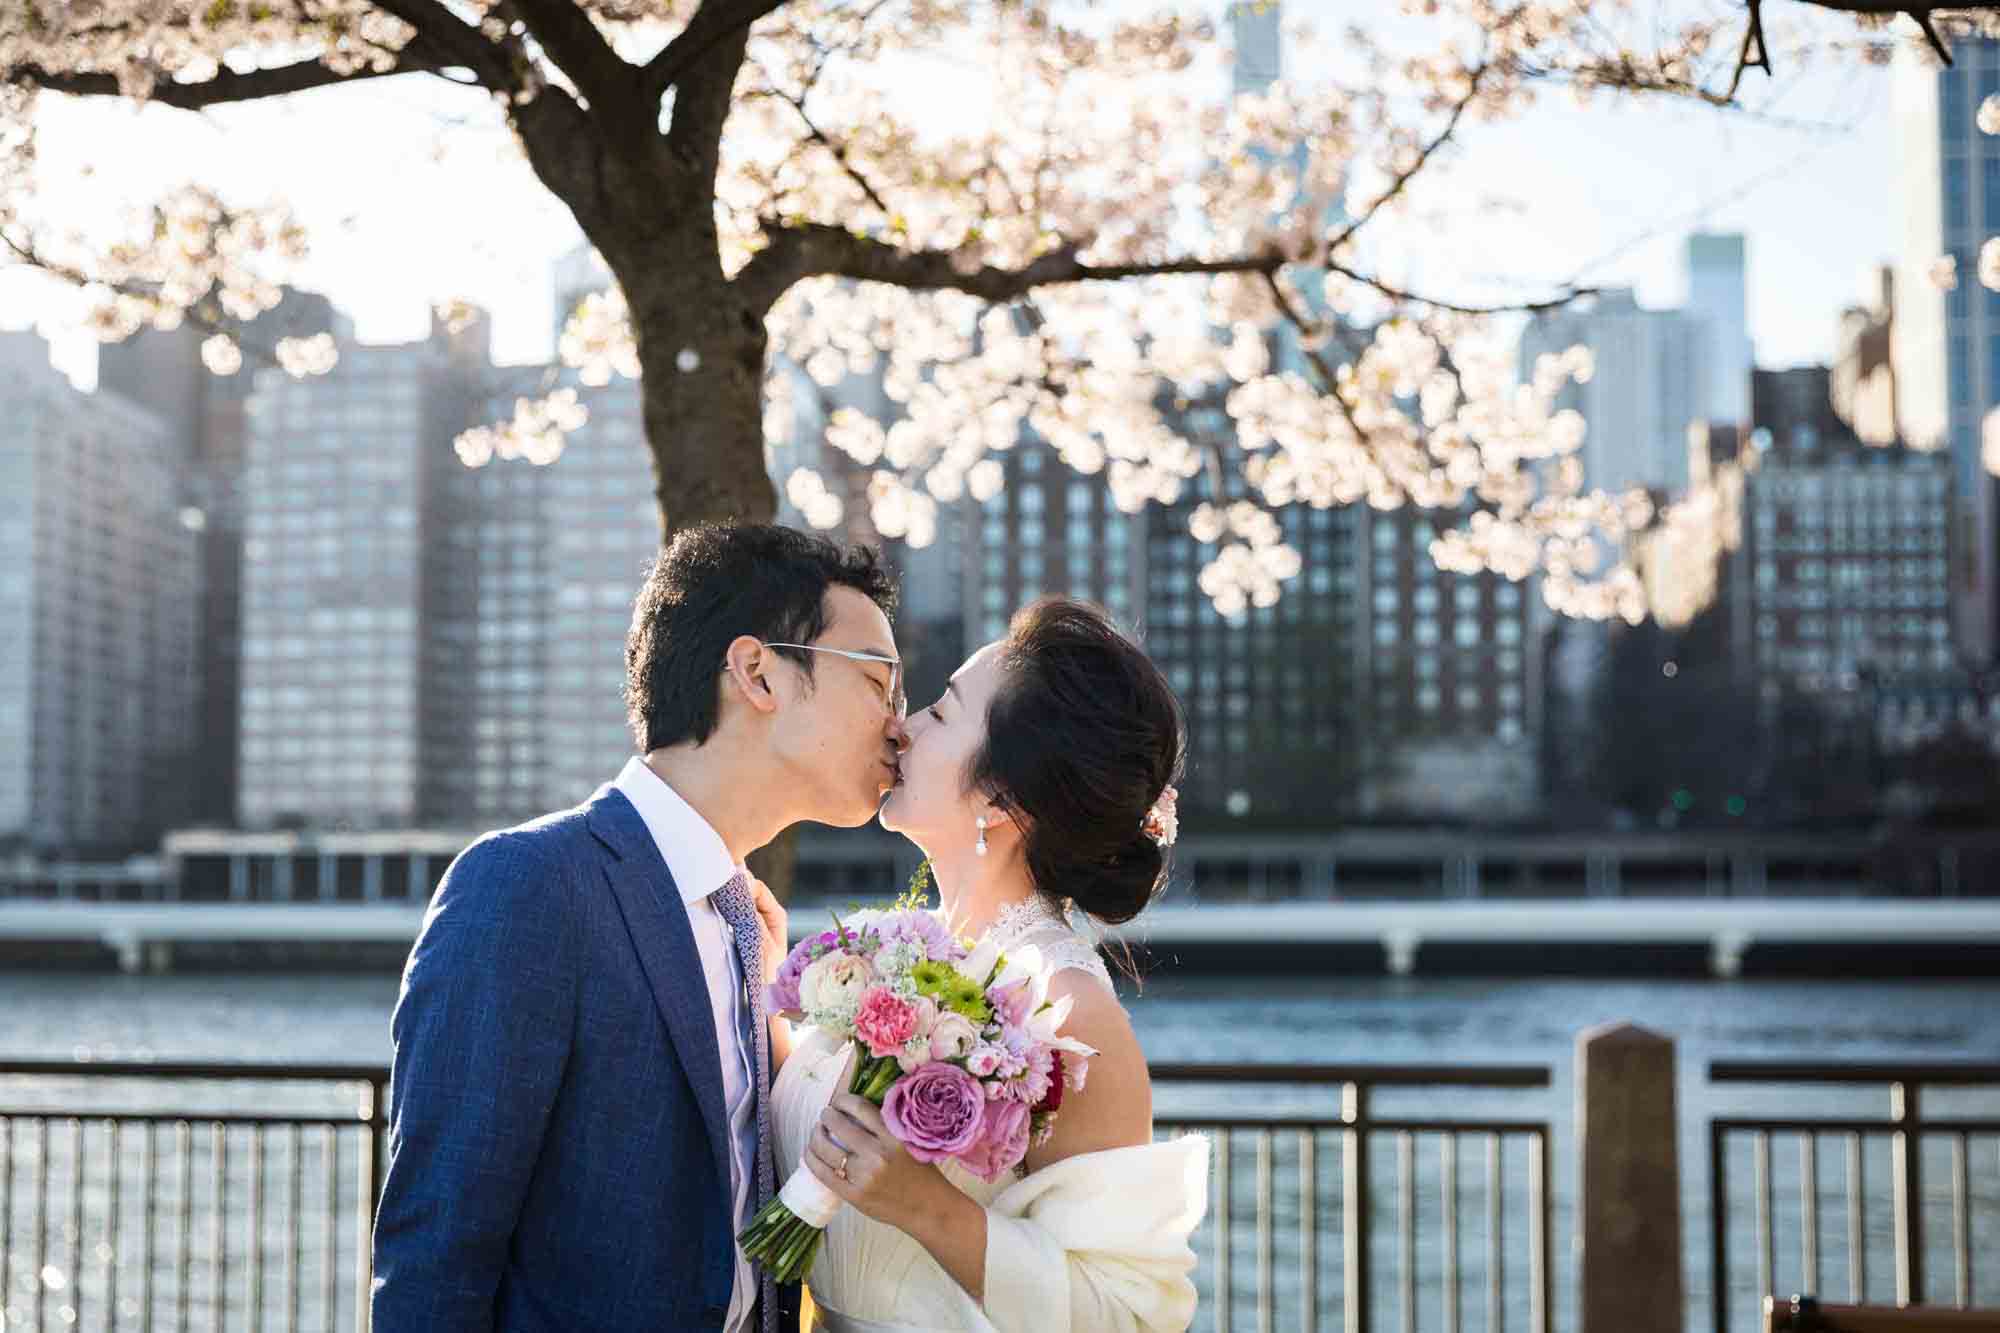 Couple kissing under cherry blossom tree during a Roosevelt Island engagement photo shoot